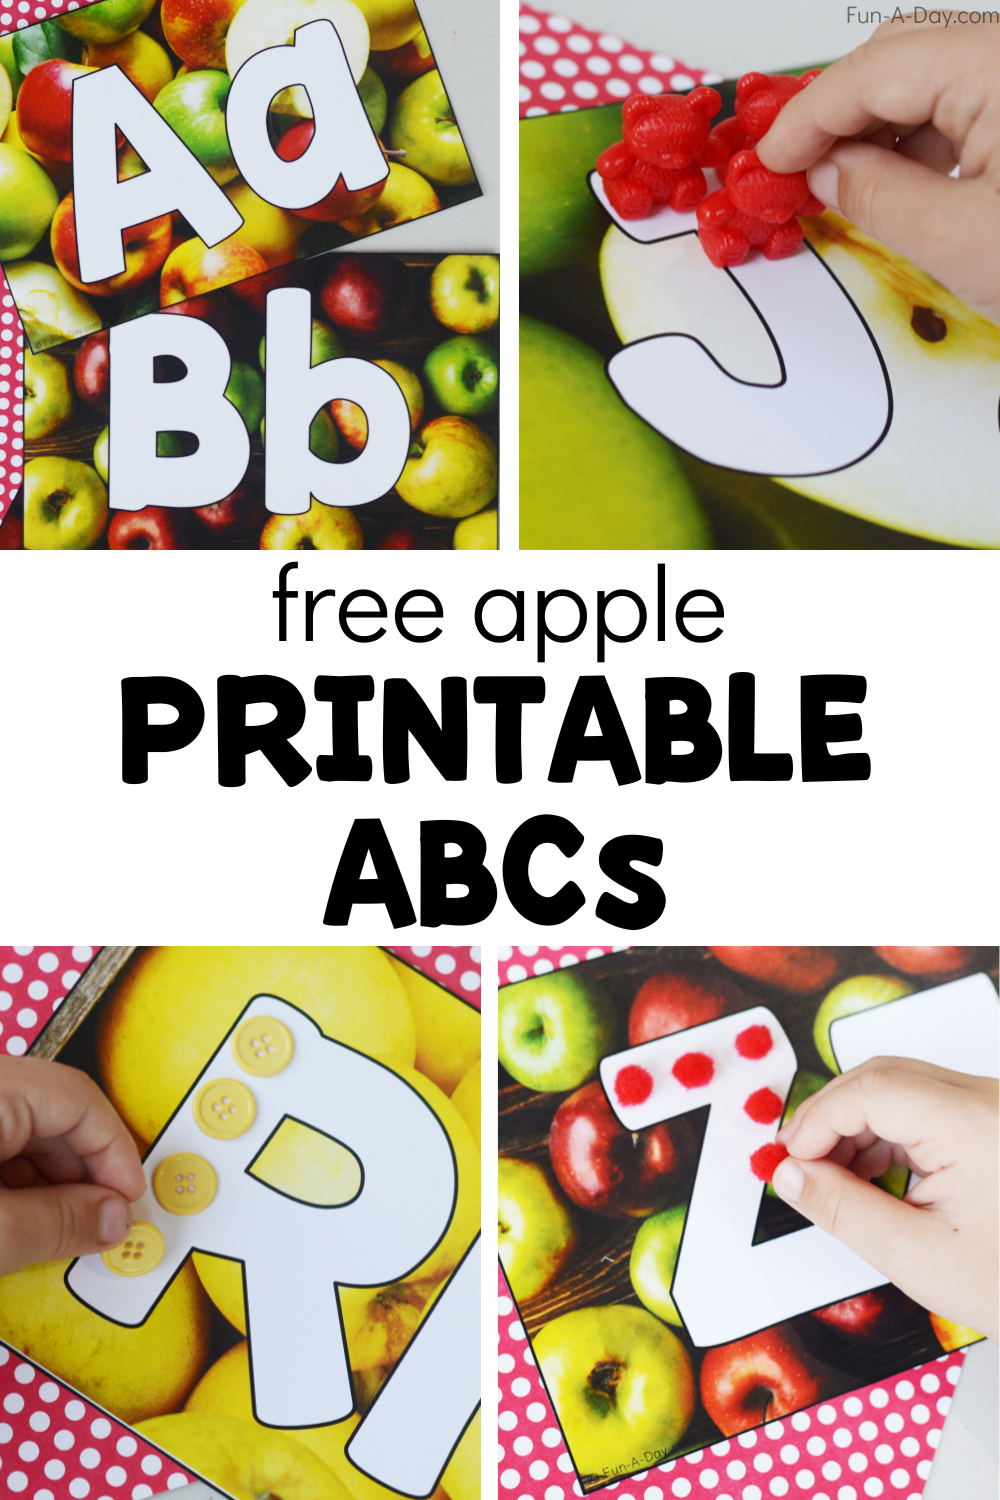 preschooler using apple ABCs in different ways with text that reads free apple printable ABCs